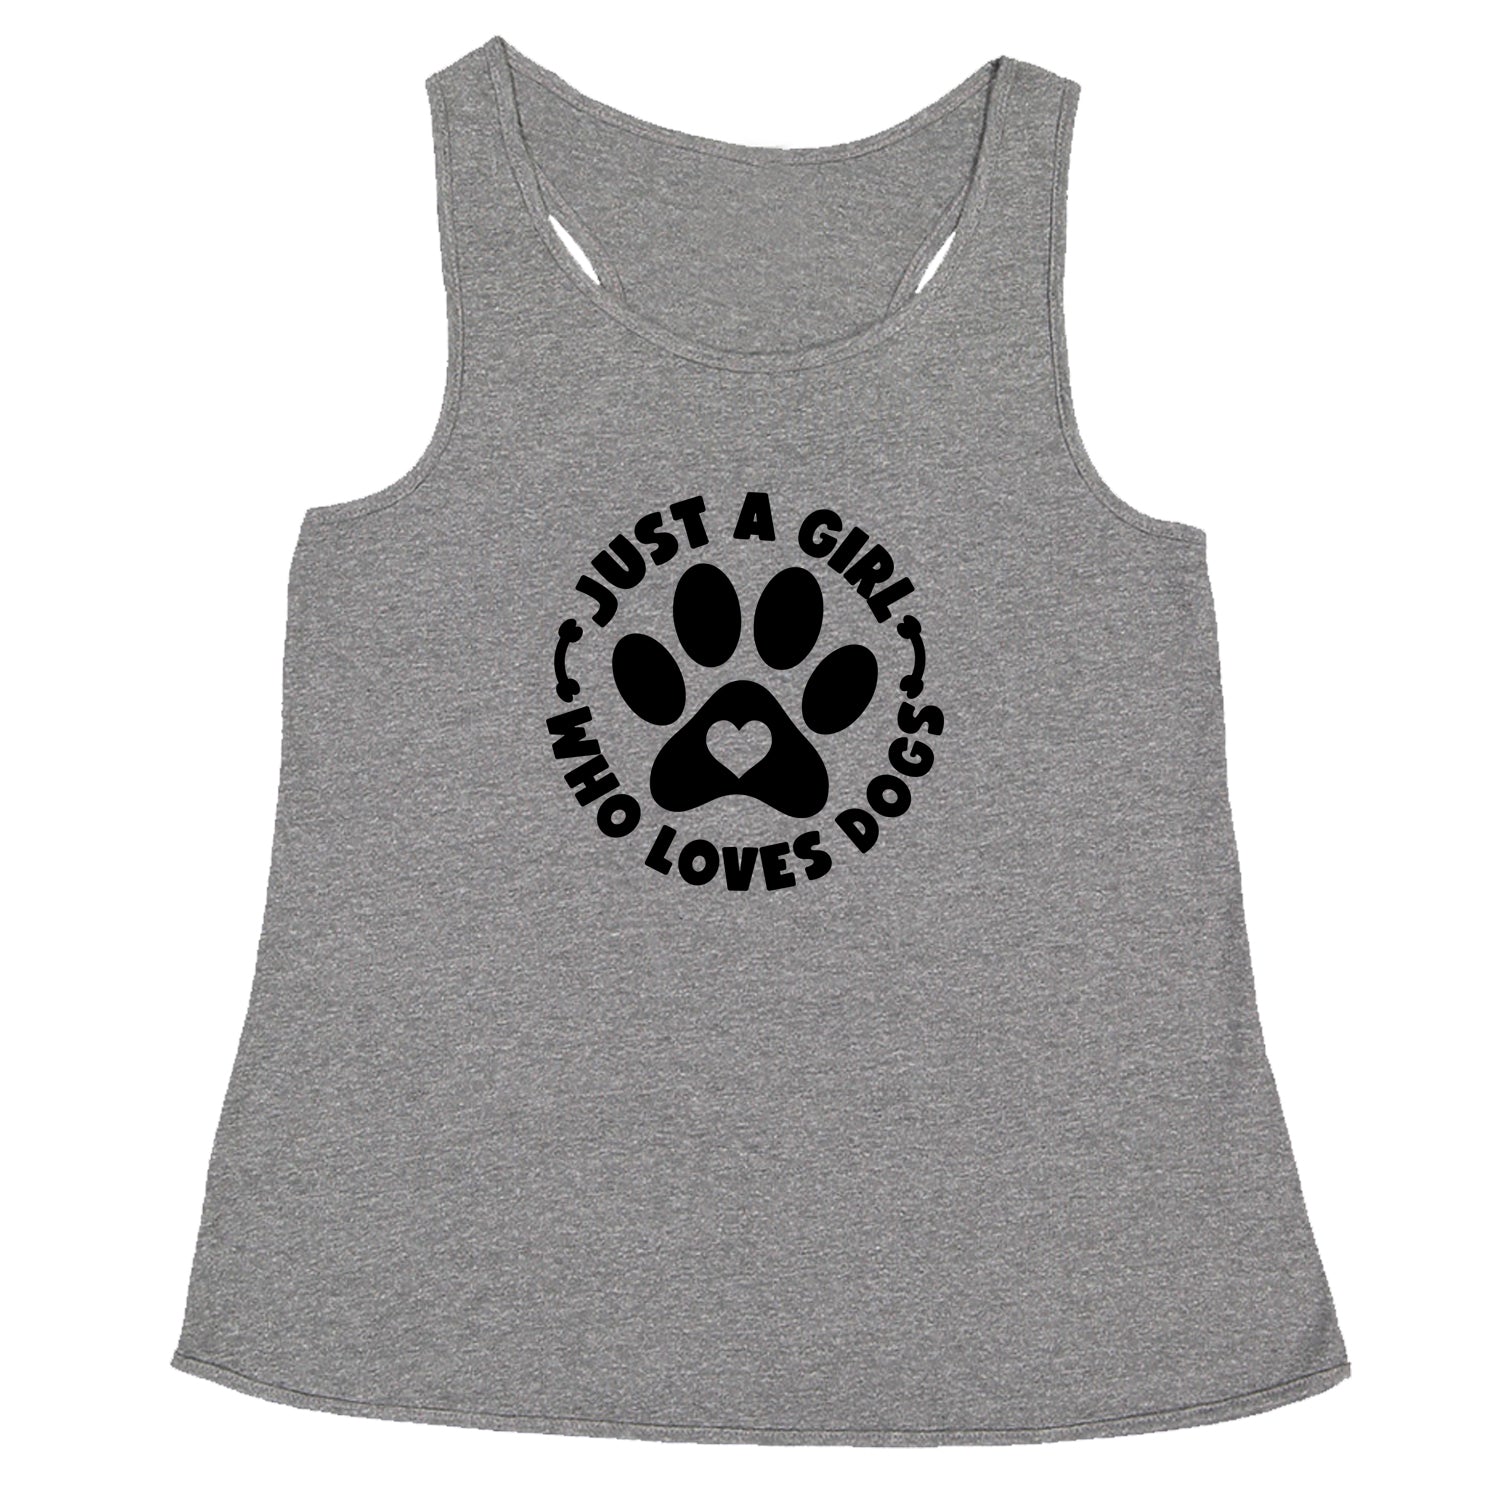 Dogs Just A Girl Who Loves DOGS Racerback Tank Top for Women dog, puppy, rescue by Expression Tees